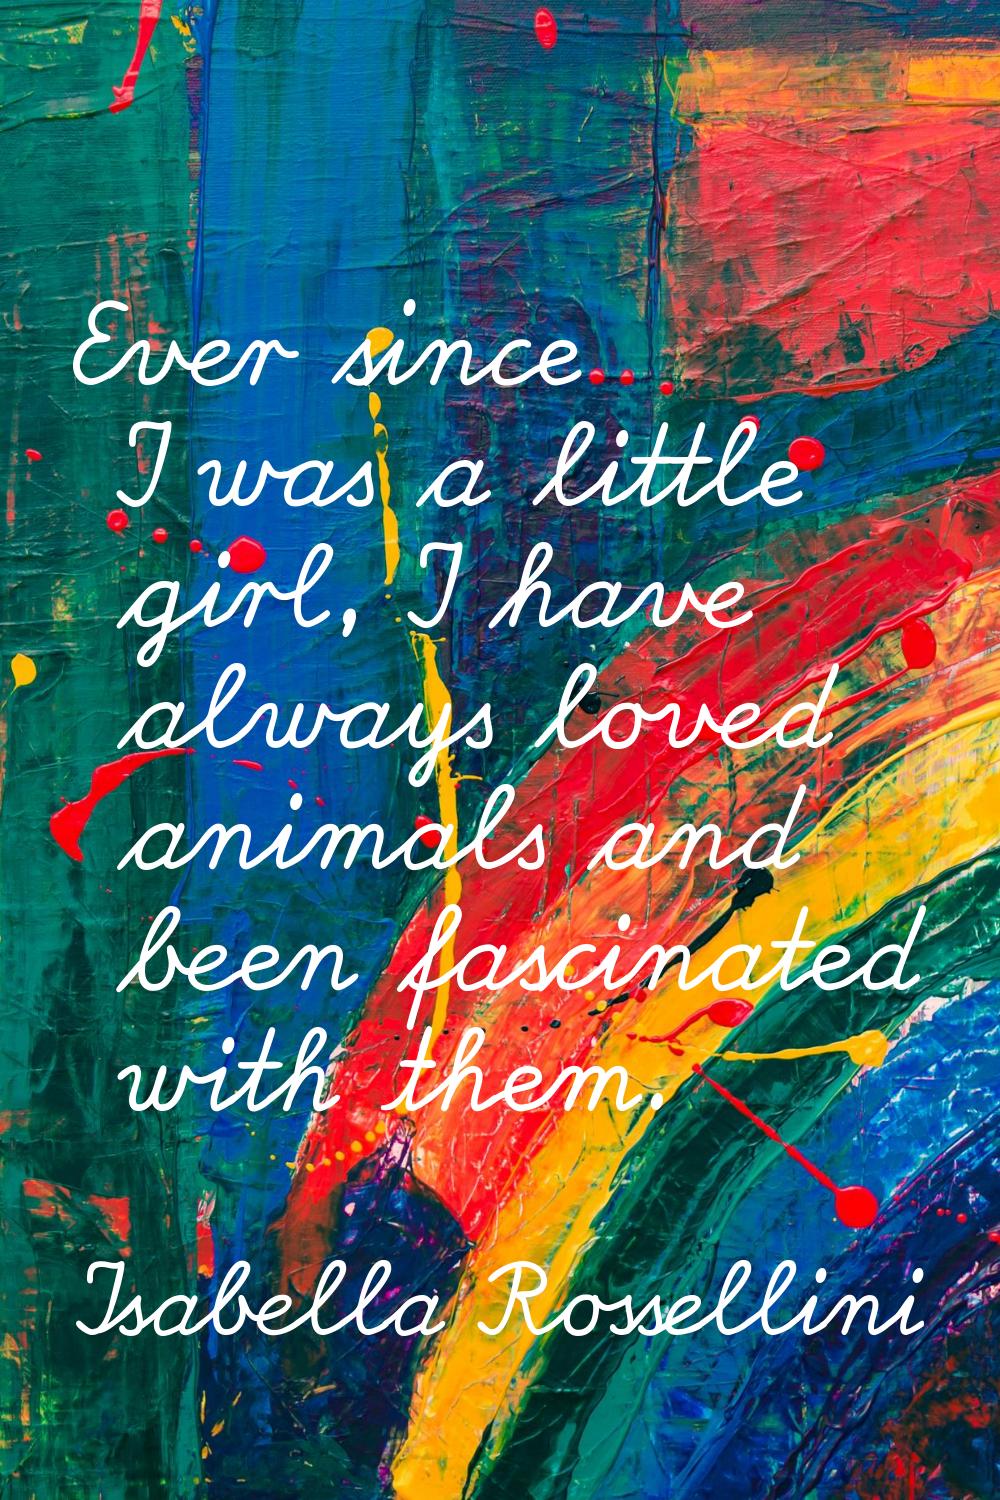 Ever since I was a little girl, I have always loved animals and been fascinated with them.